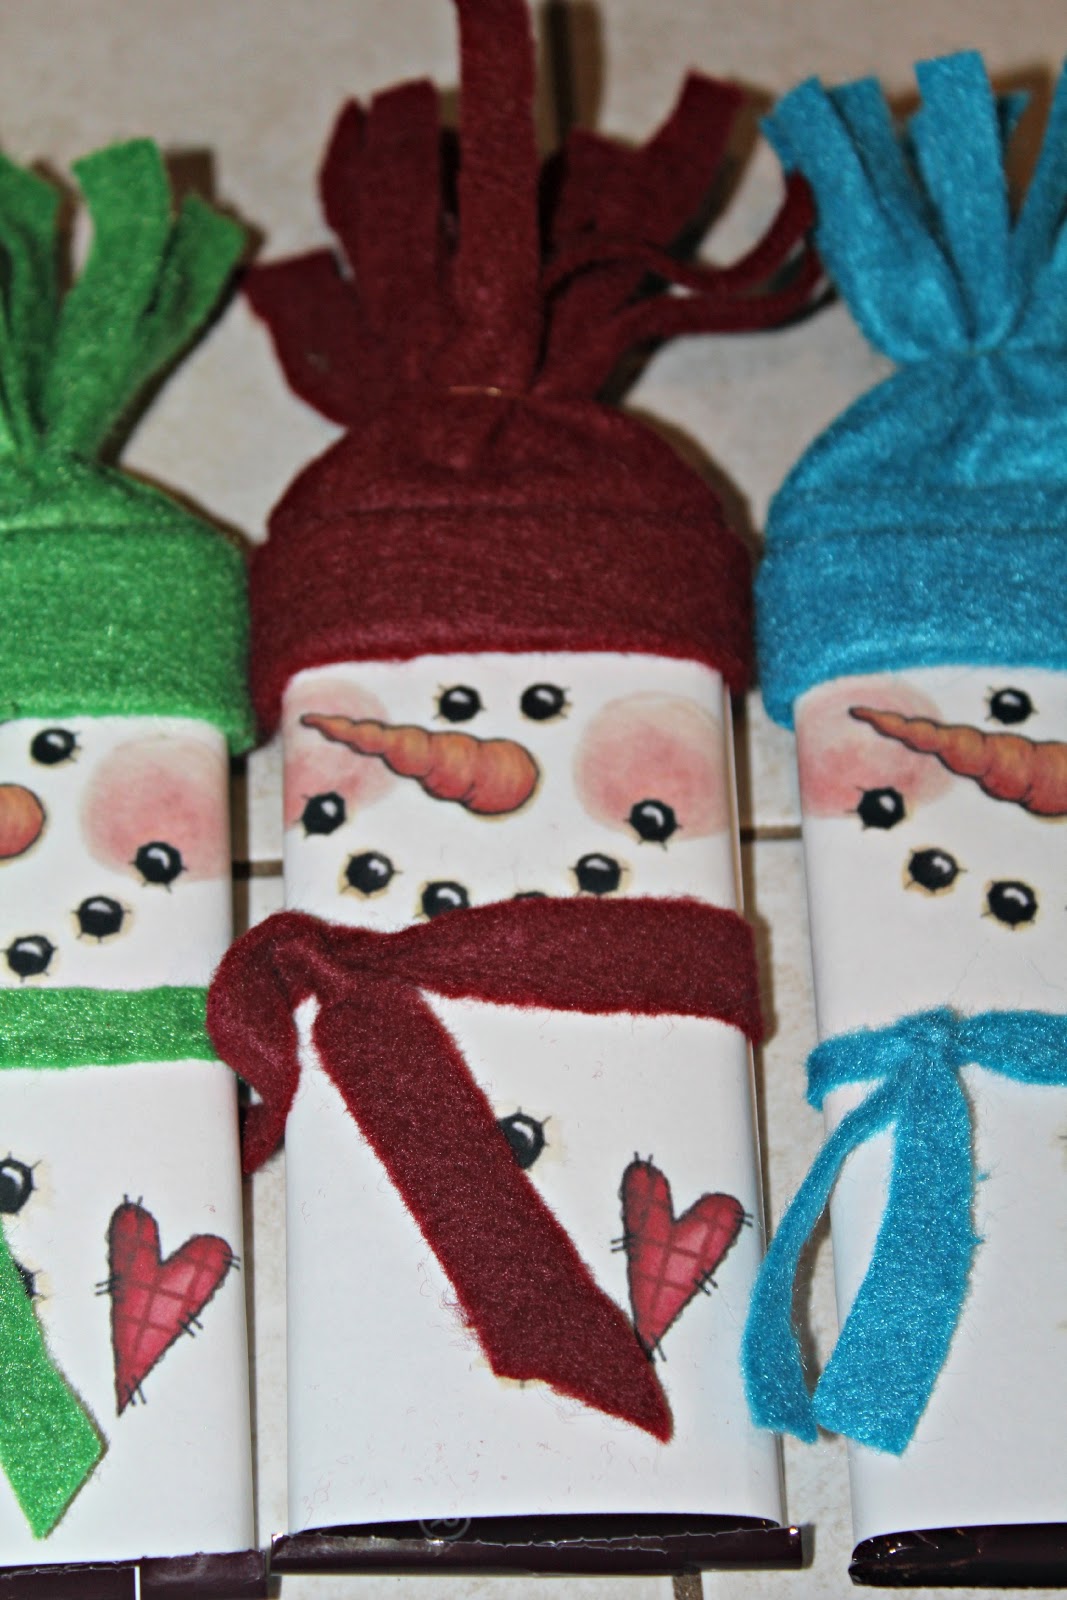 deanne-s-crafting-adventures-snowman-hershey-bar-gifts